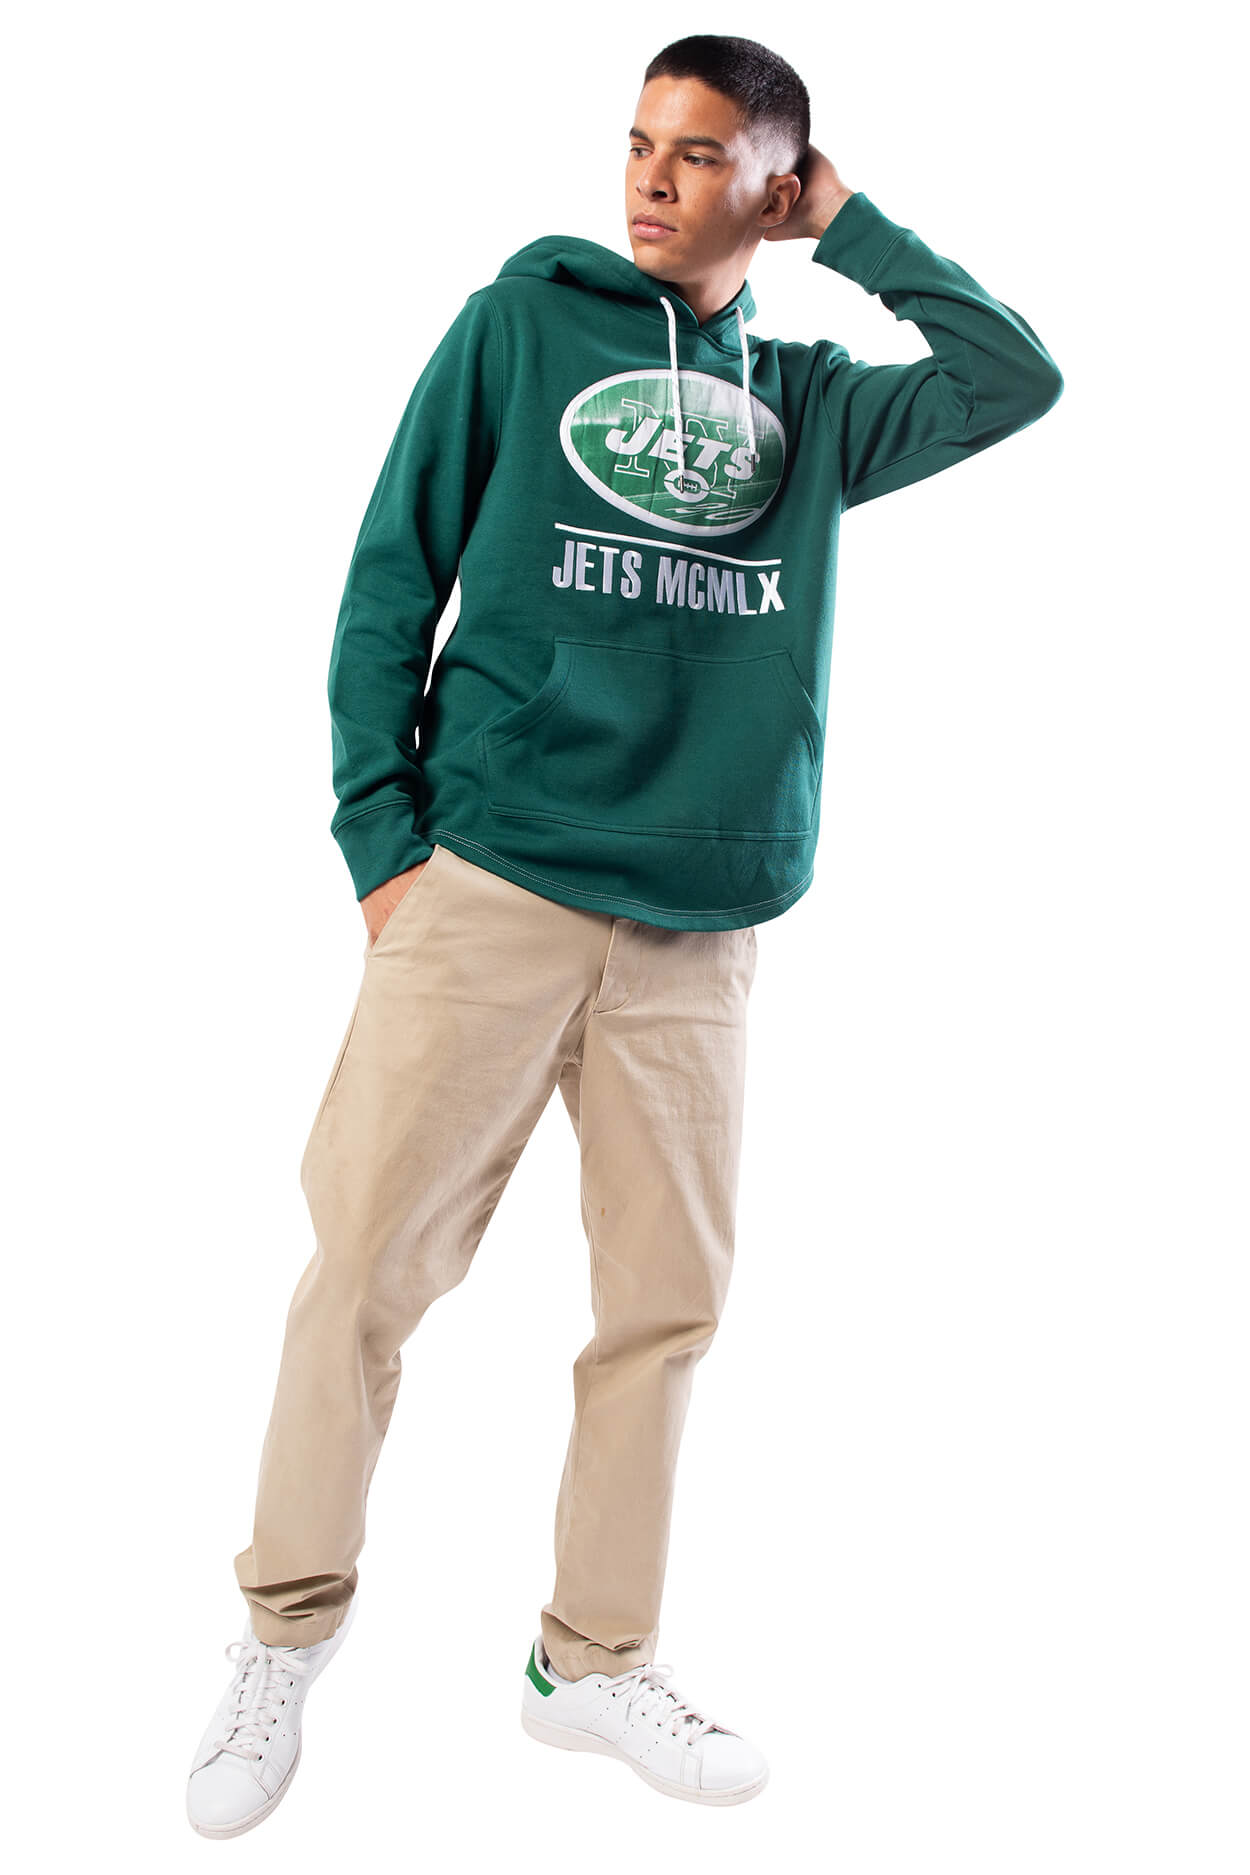 NFL New York Jets Men's Embroidered Hoodie|New York Jets